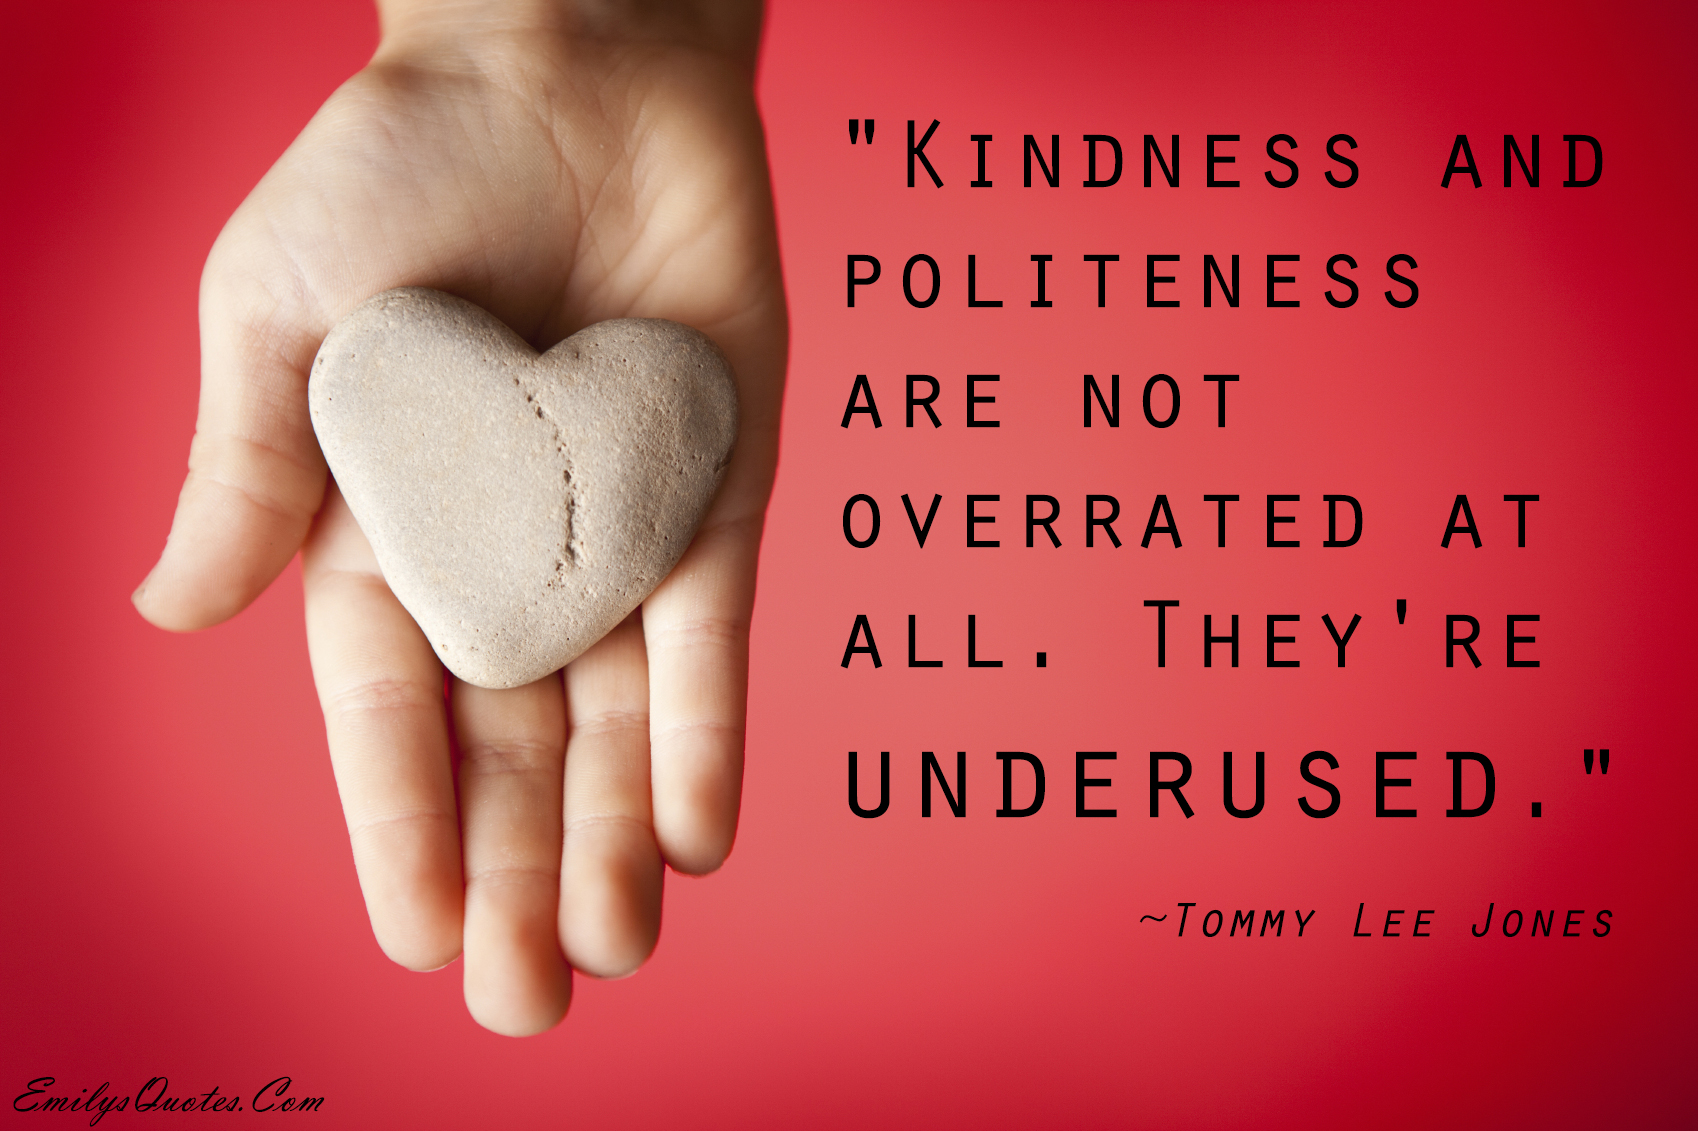 Kindness and politeness are not overrated at all. They’re underused